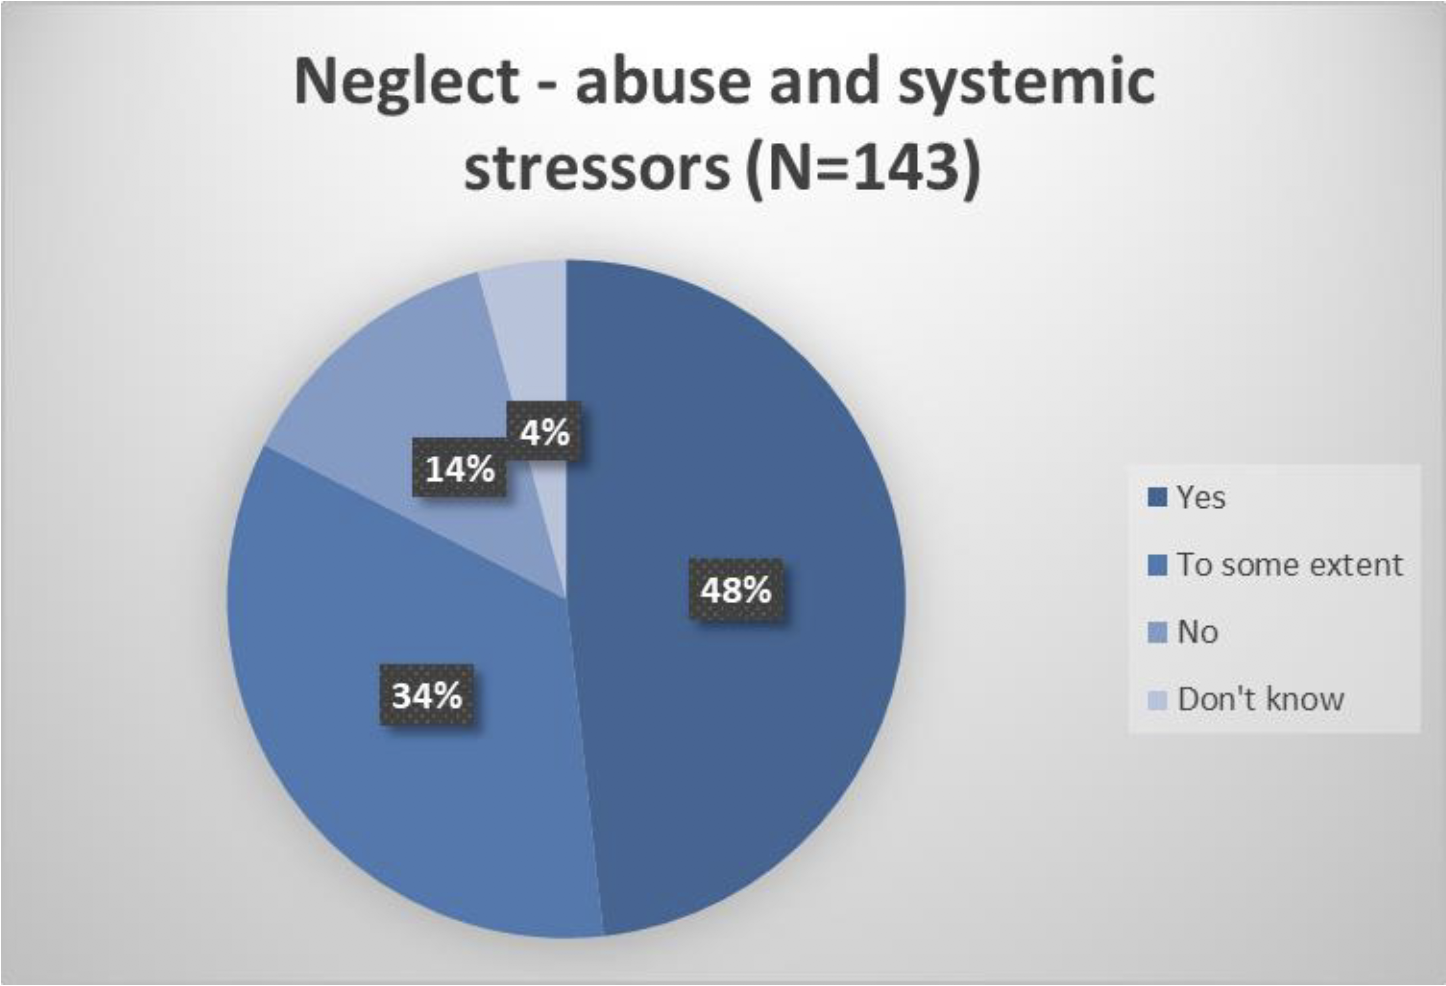 Pie chart showing whether respondents agreed with discussing whether neglect should be defined as abuse where it is a consequence of systemic stressors such as poverty:
Yes 48%
To some extent 34%
No 14%
Don't know 4%